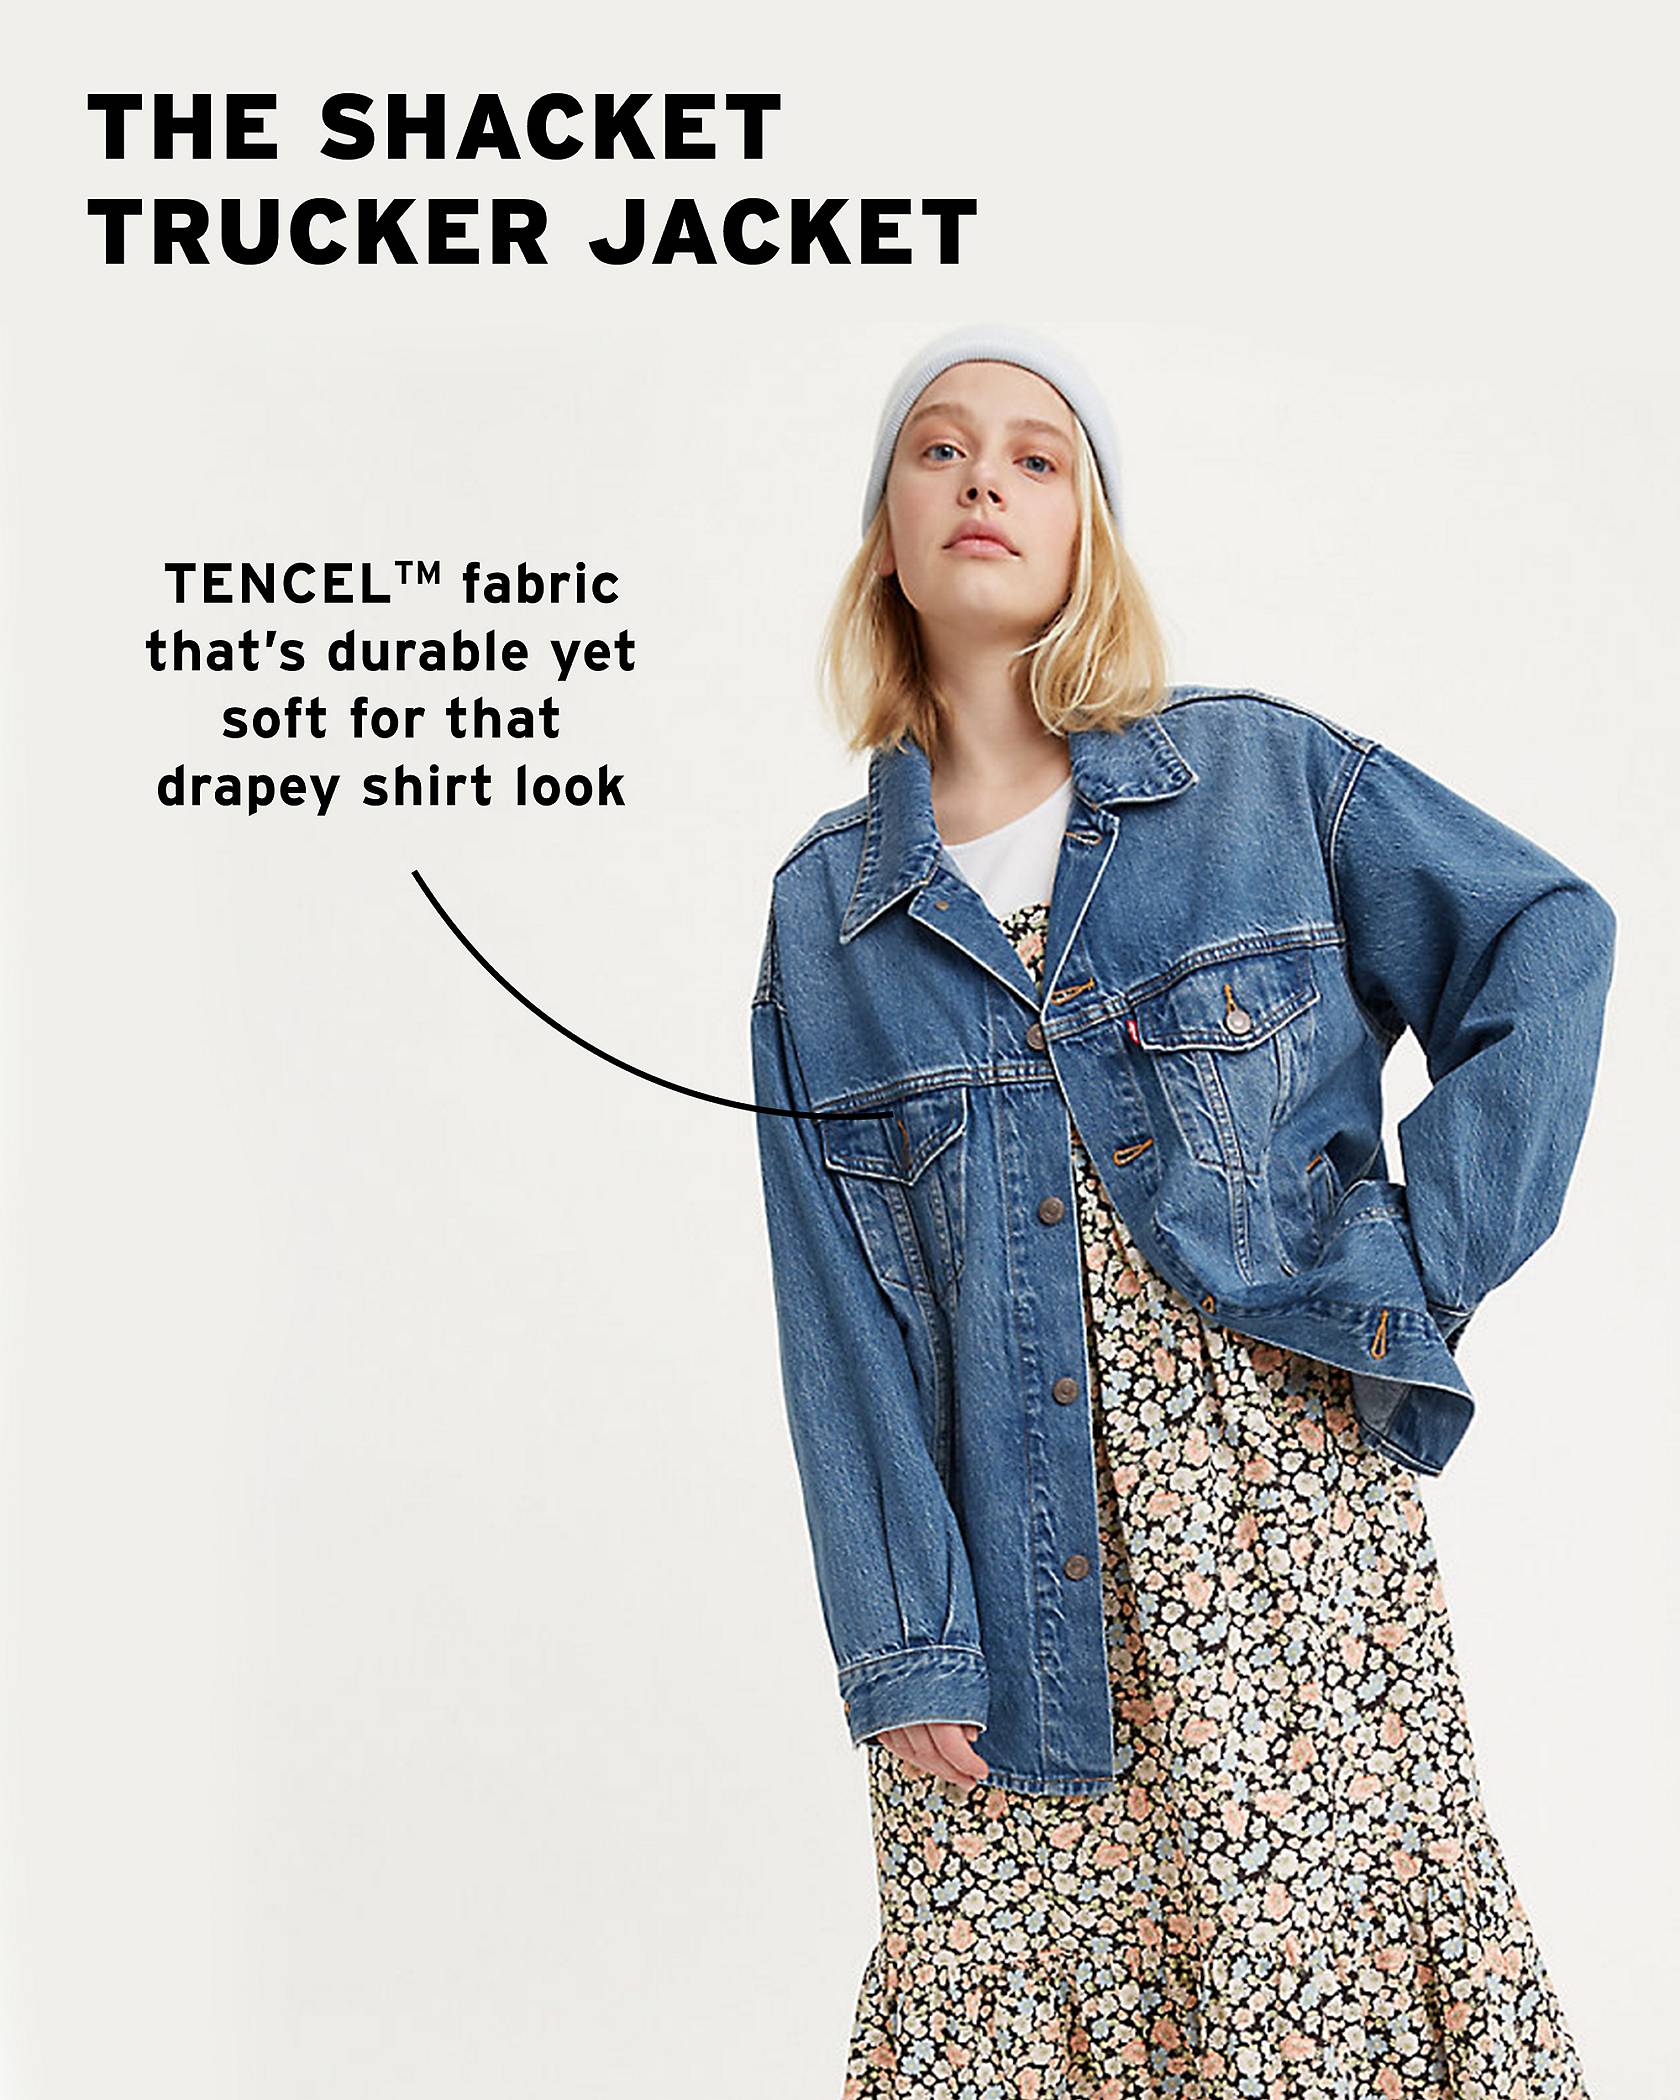 Model in Shacket Trucker jacket with copy: "TENCEL fabric that’s durable yet soft for that drapey shirt look"